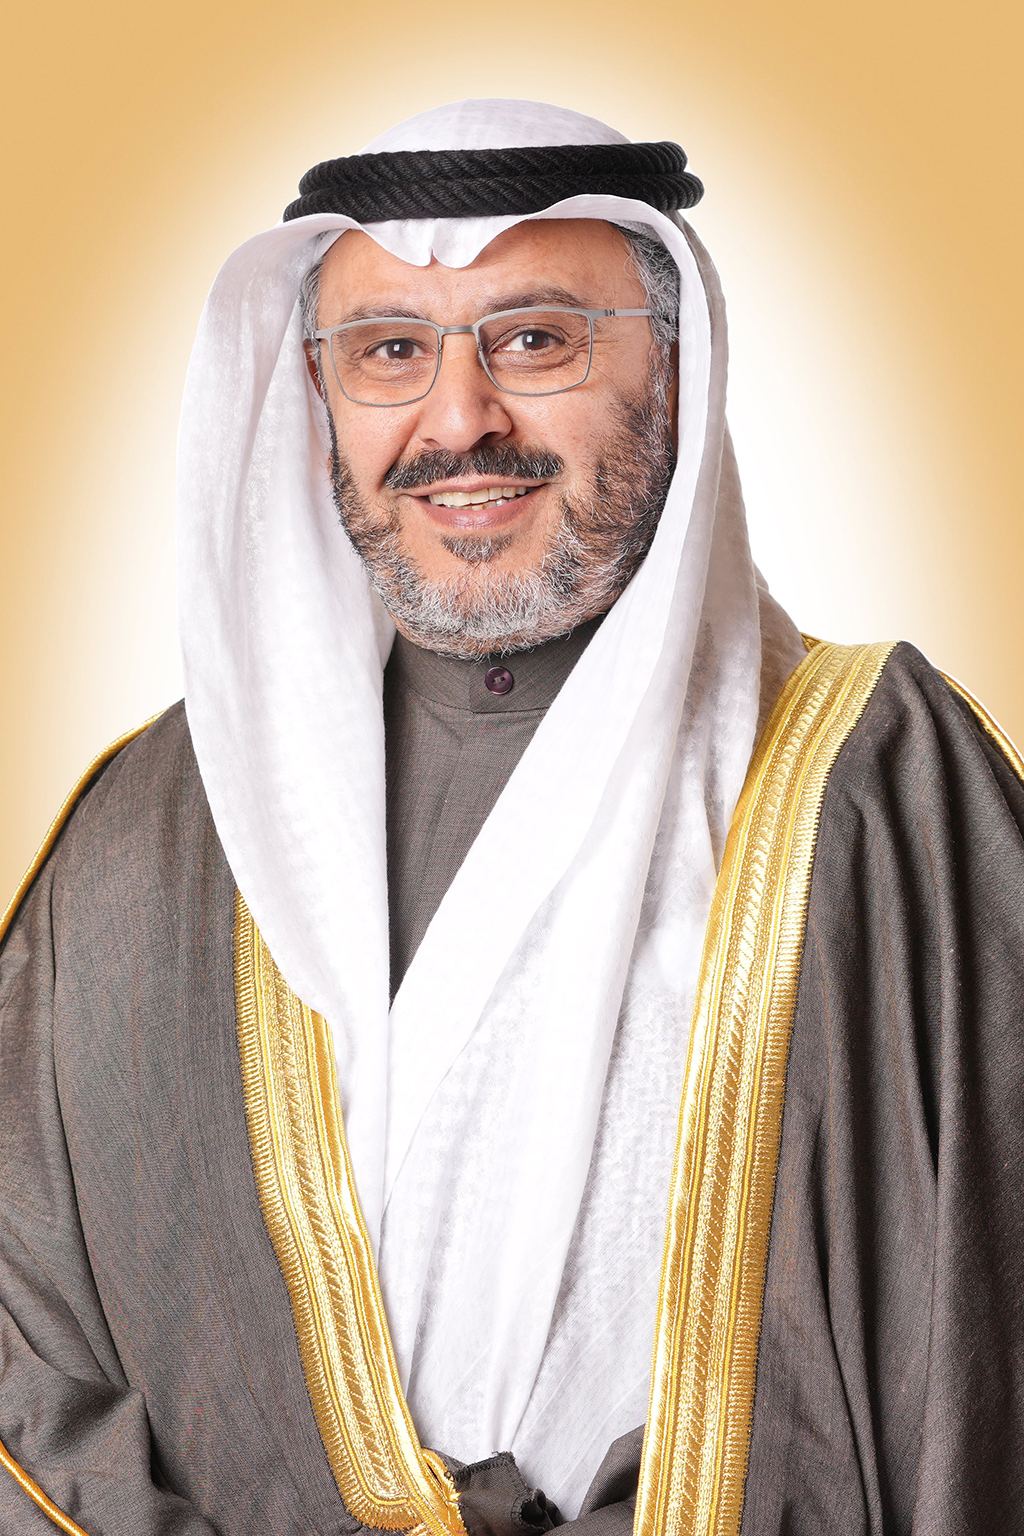 Fahad Al-Shuraian, Minister of Commerce and Industry and Minister of Social Affairs.